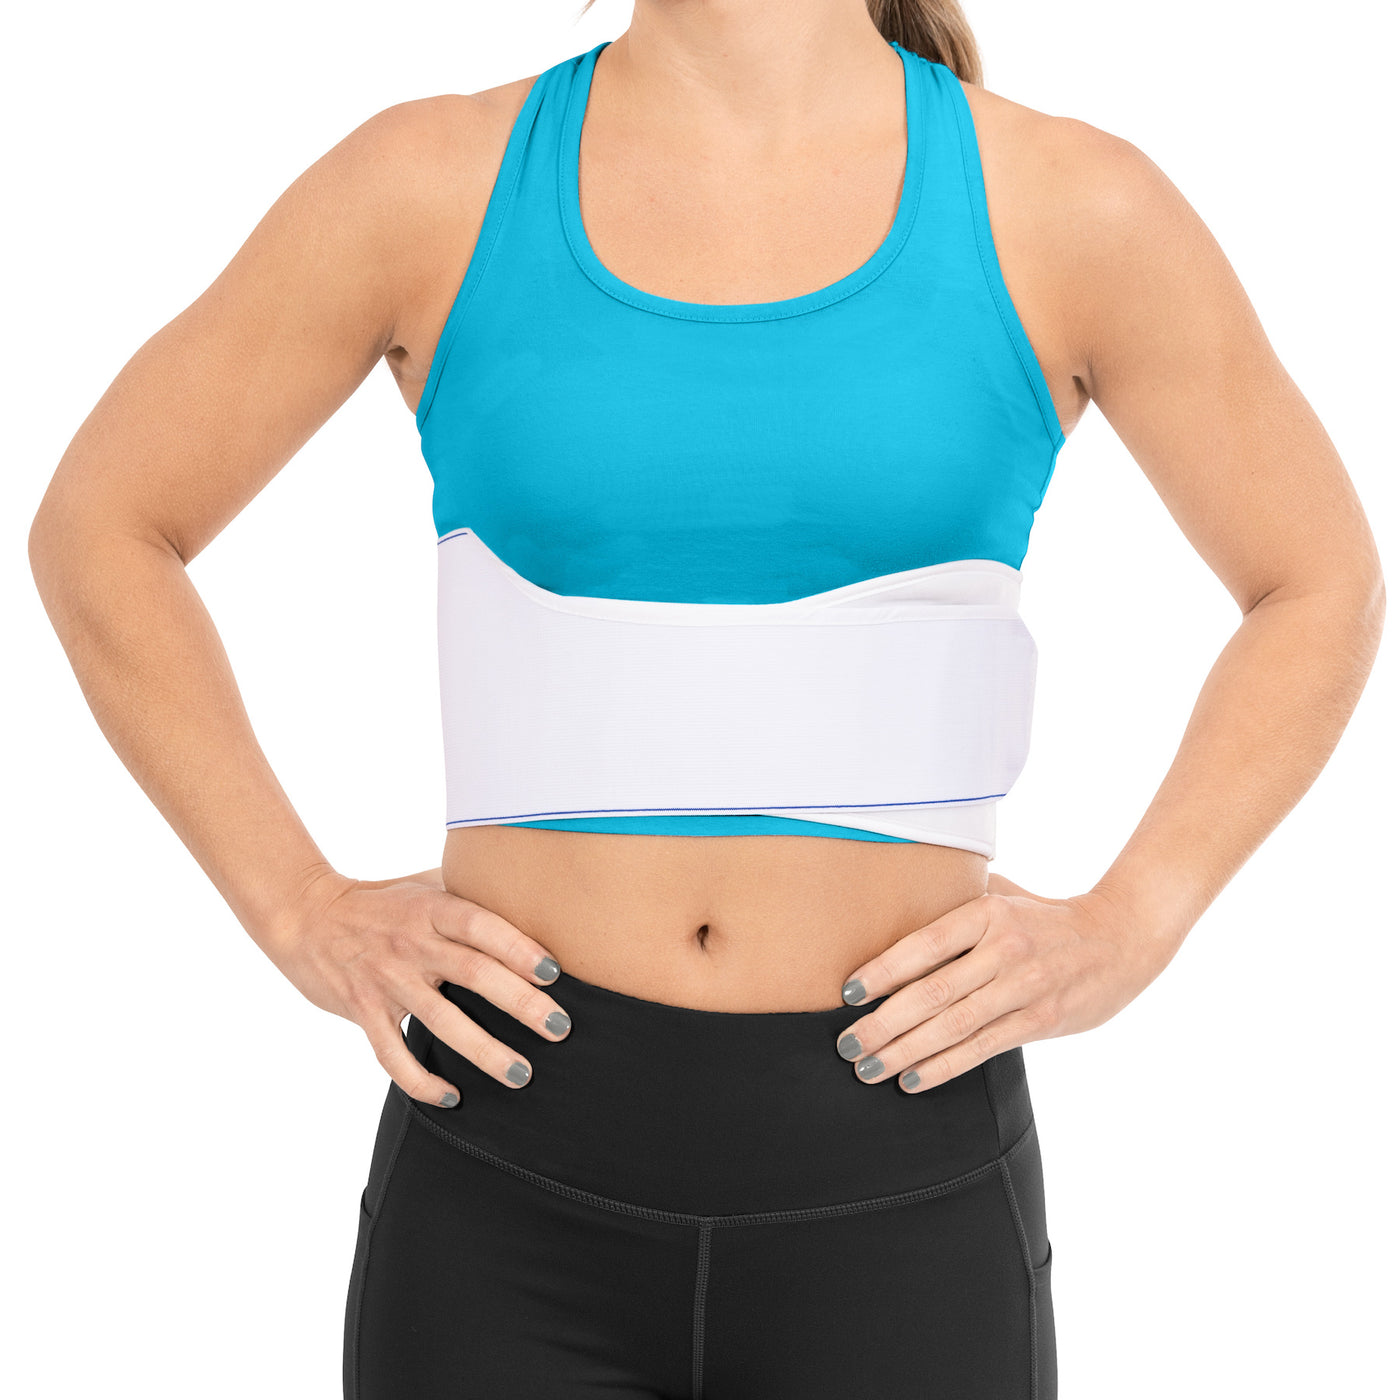 Breathable Broken Rib Chest Brace Support Protector Wrap Belt - Size L, Shop Today. Get it Tomorrow!